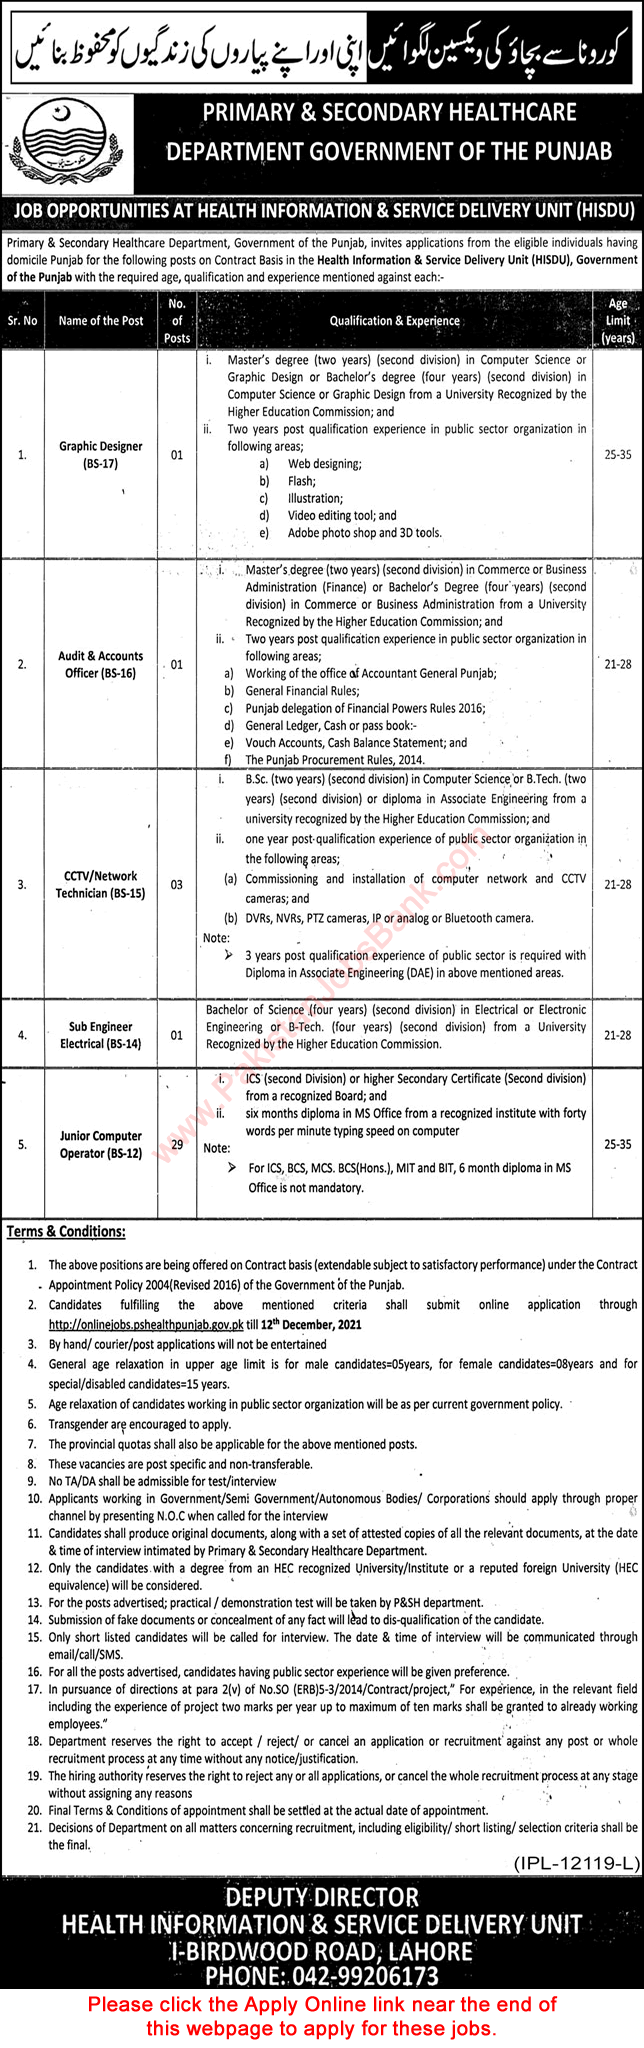 Primary and Secondary Healthcare Department Punjab Jobs November 2021 HISDU Apply Online Computer Operators & Others Latest